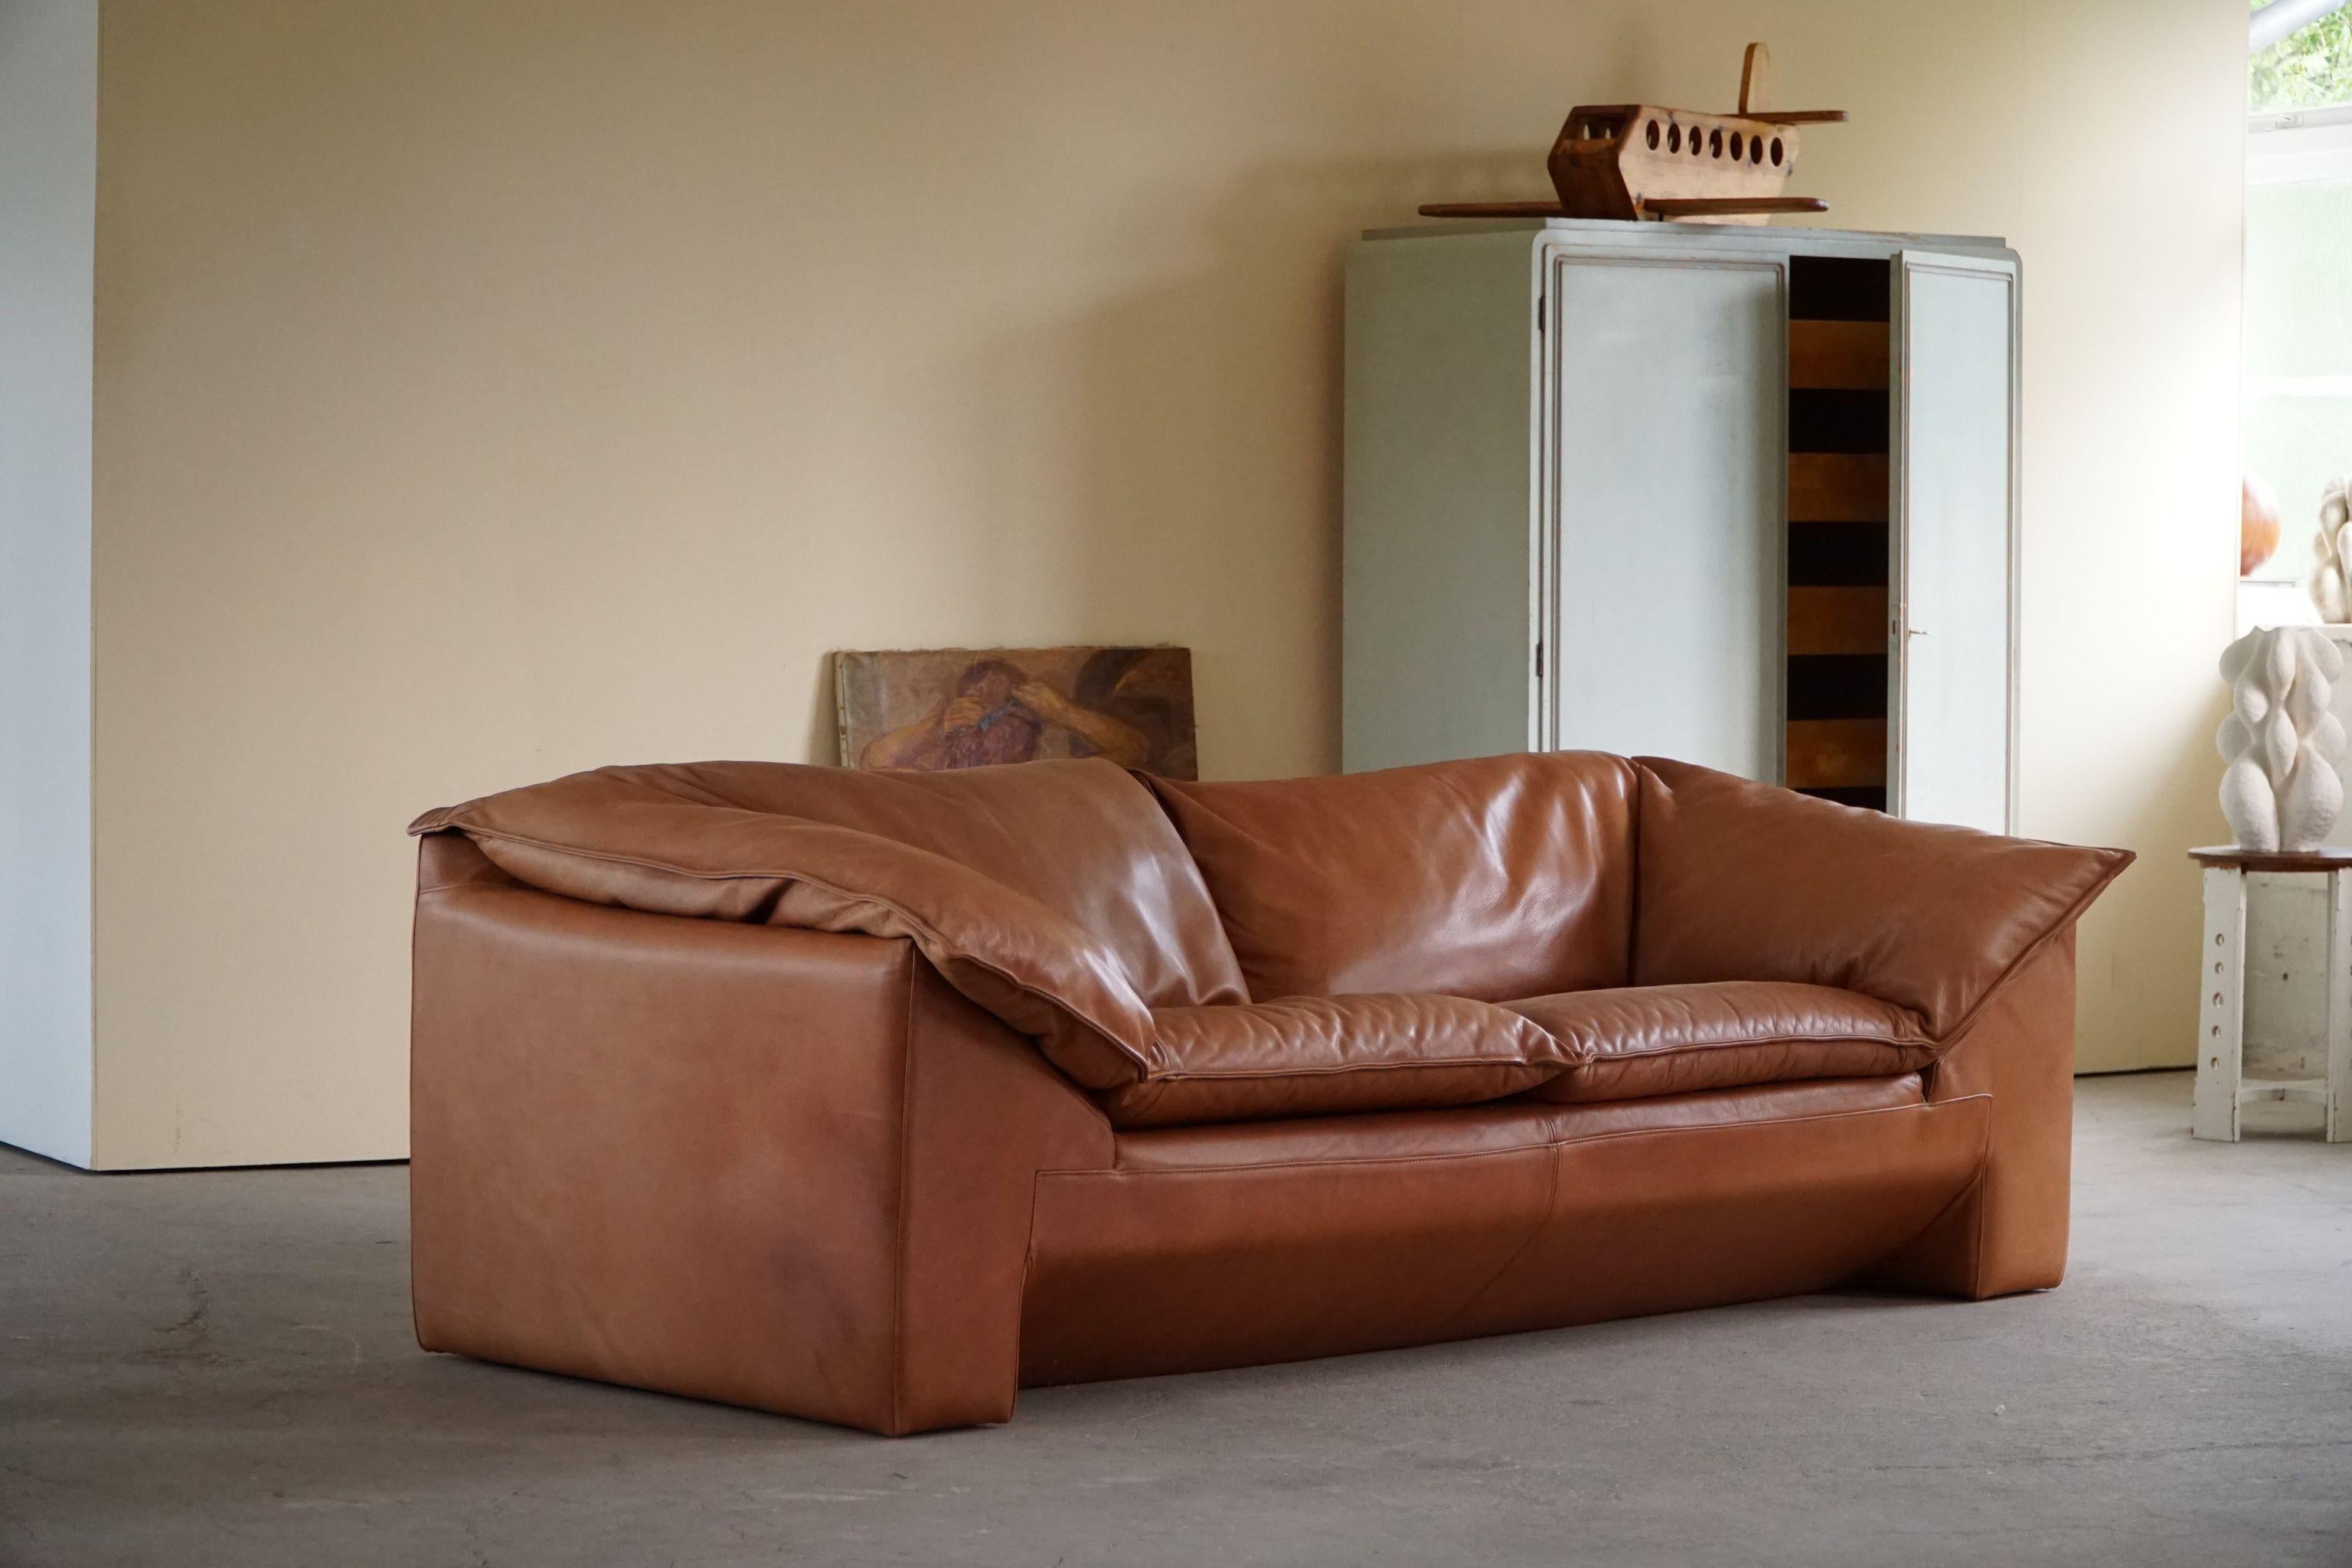 Stunning classic Danish 2.5 seater sofa in cognac brown leather. Designed by Jens Juul Eilersen for Niels Eilersen, Denmark, 1970s. The design reminds us of some of the best Italian classics. The overall impression in this vintage piece is really